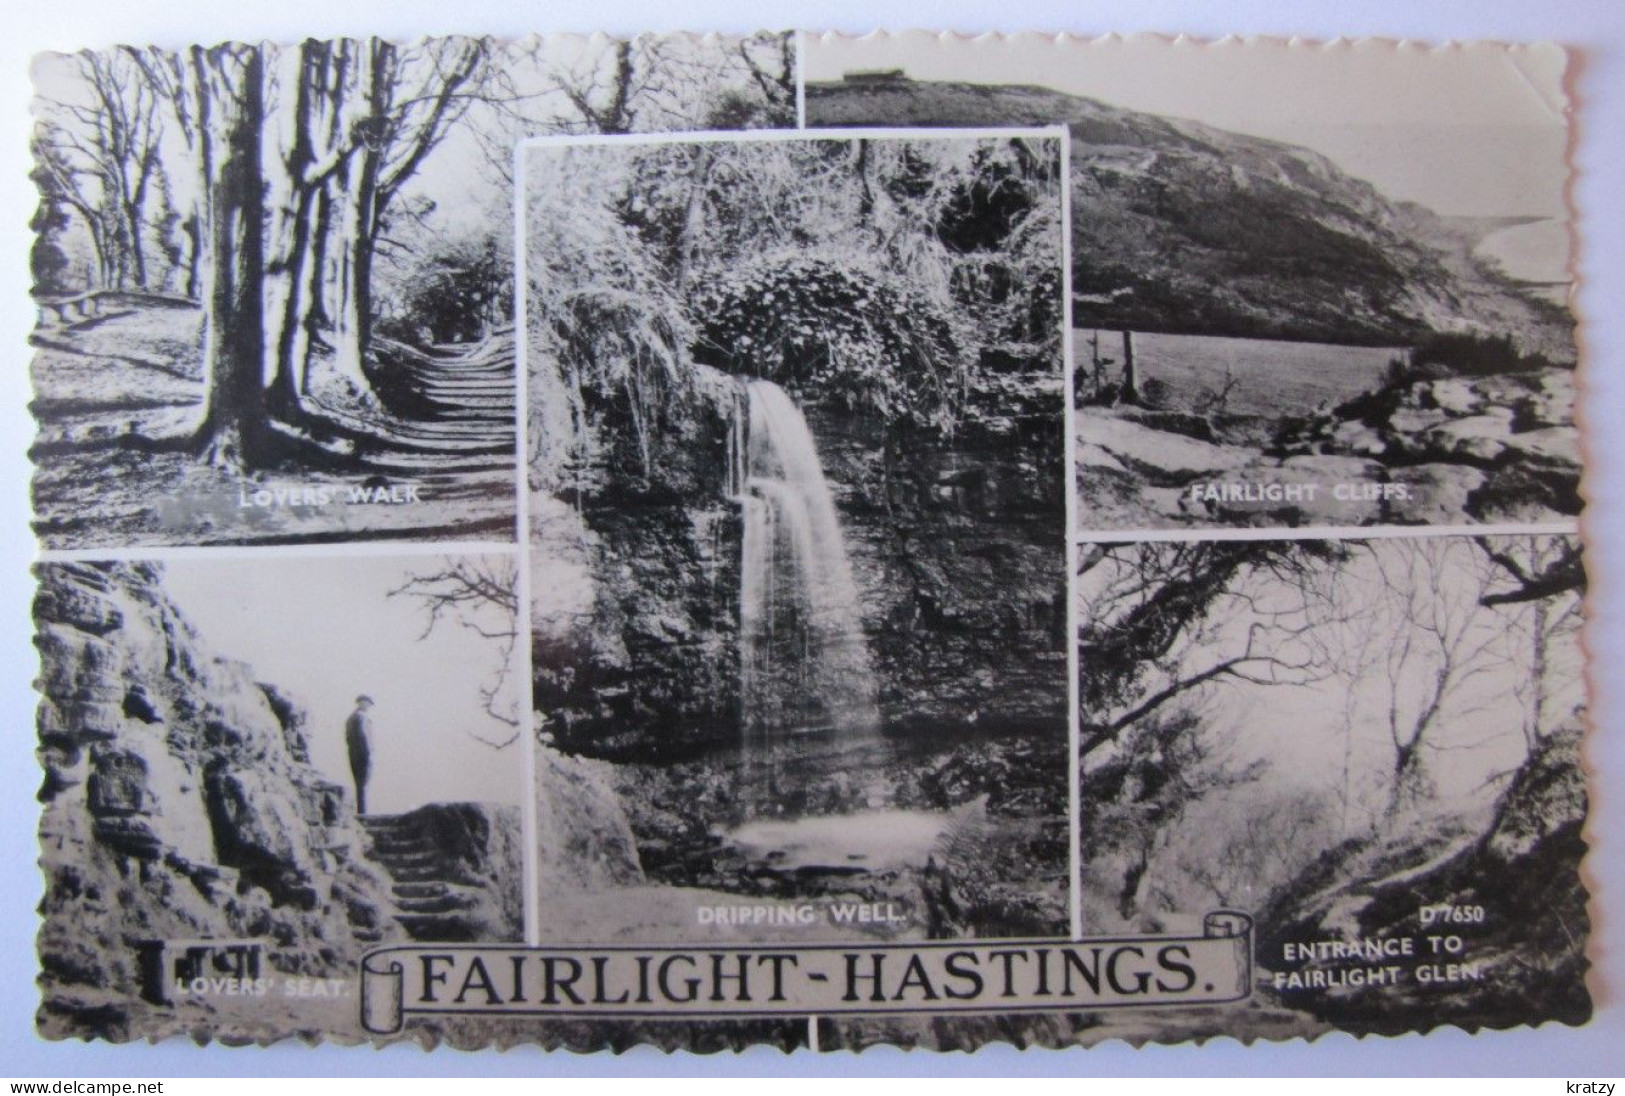 ROYAUME-UNI - ANGLETERRE - SUSSEX - HASTINGS - Views The Fairlight - Hastings